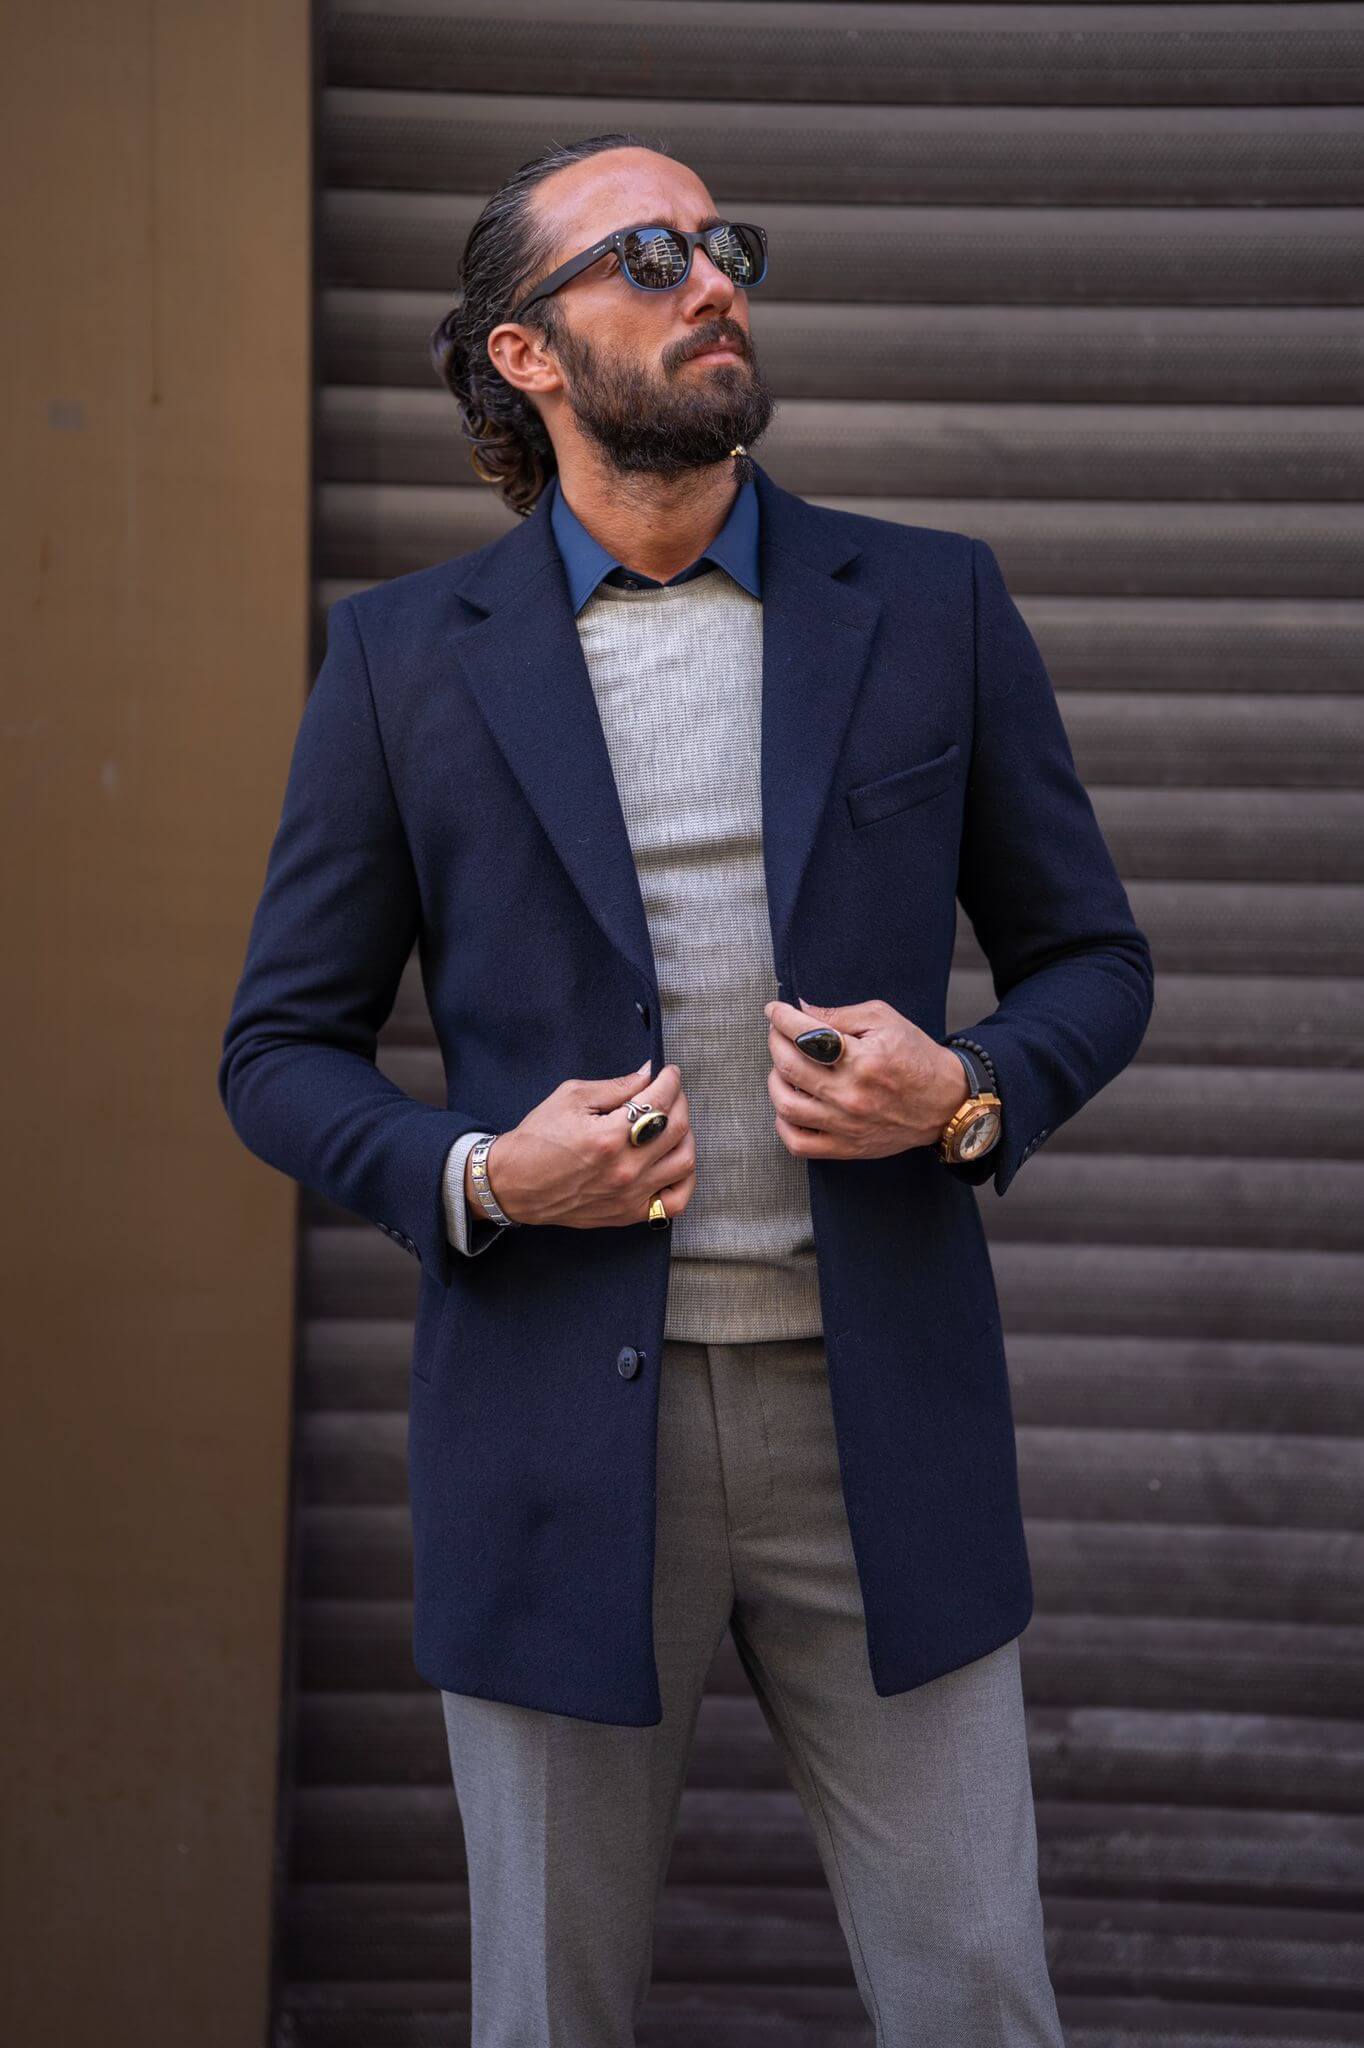 Confident male model exudes sophistication in our impeccably tailored navy blue coat